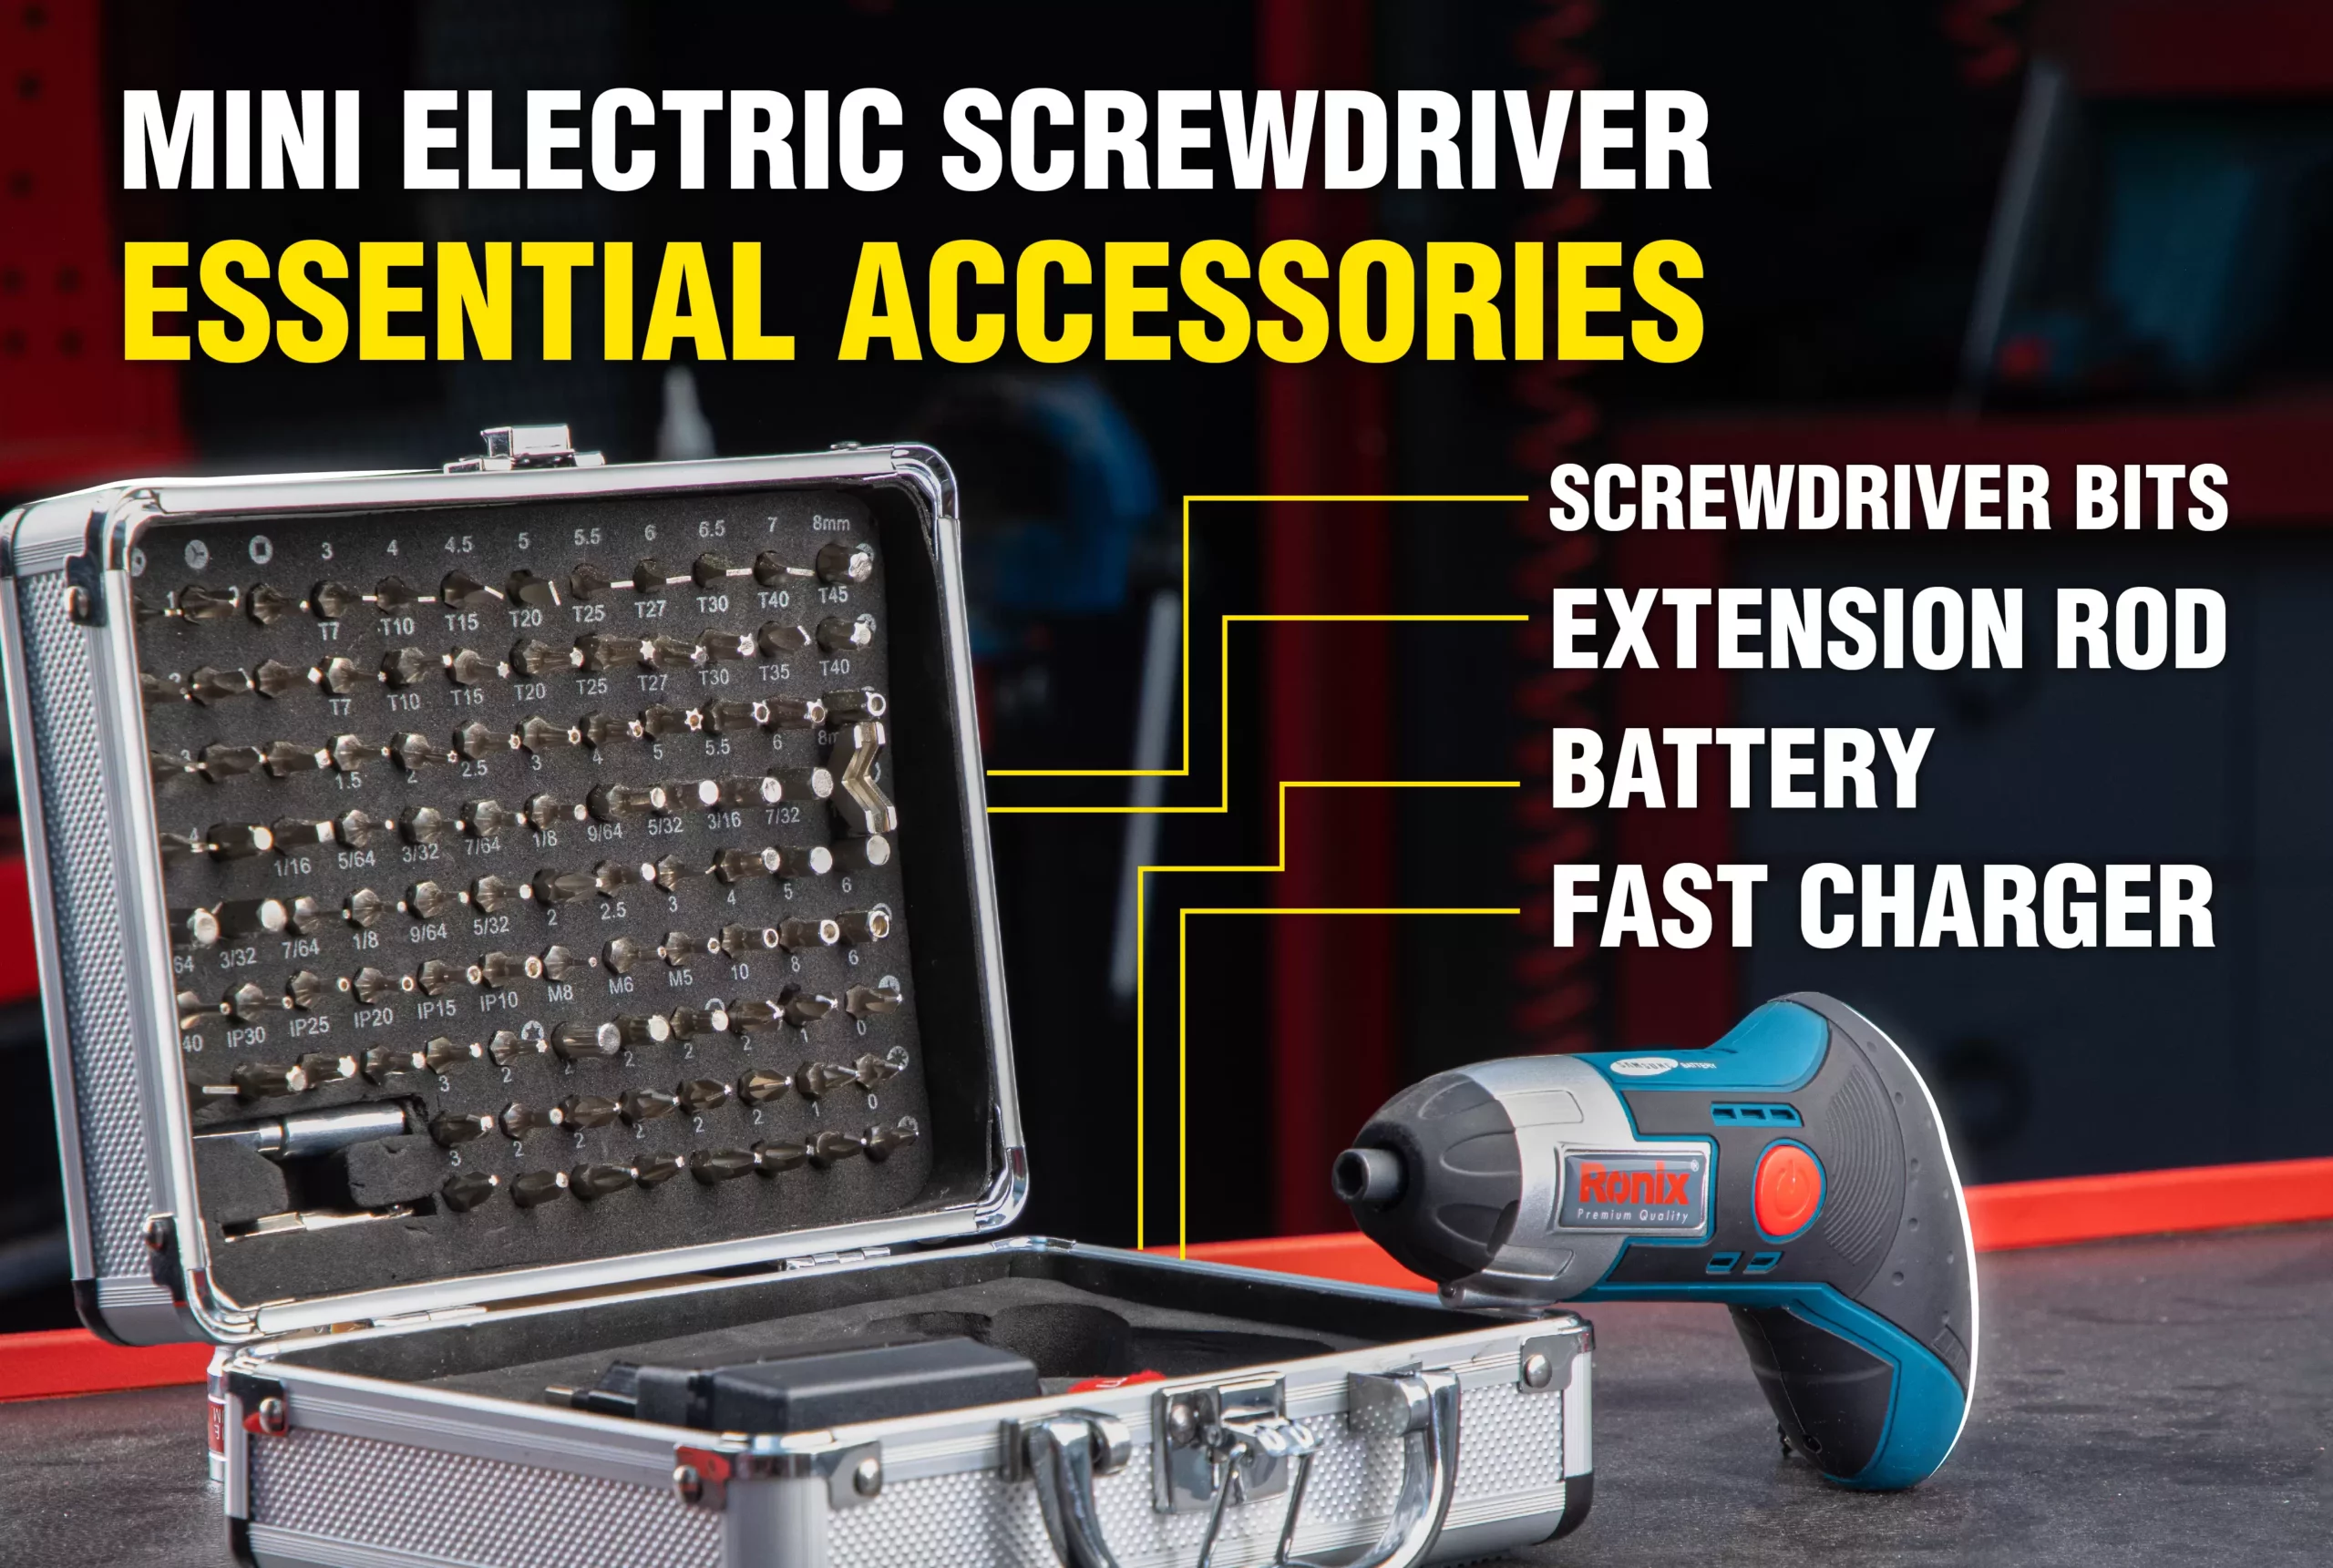 An infographic about a mini electric screwdriver's essential accessories